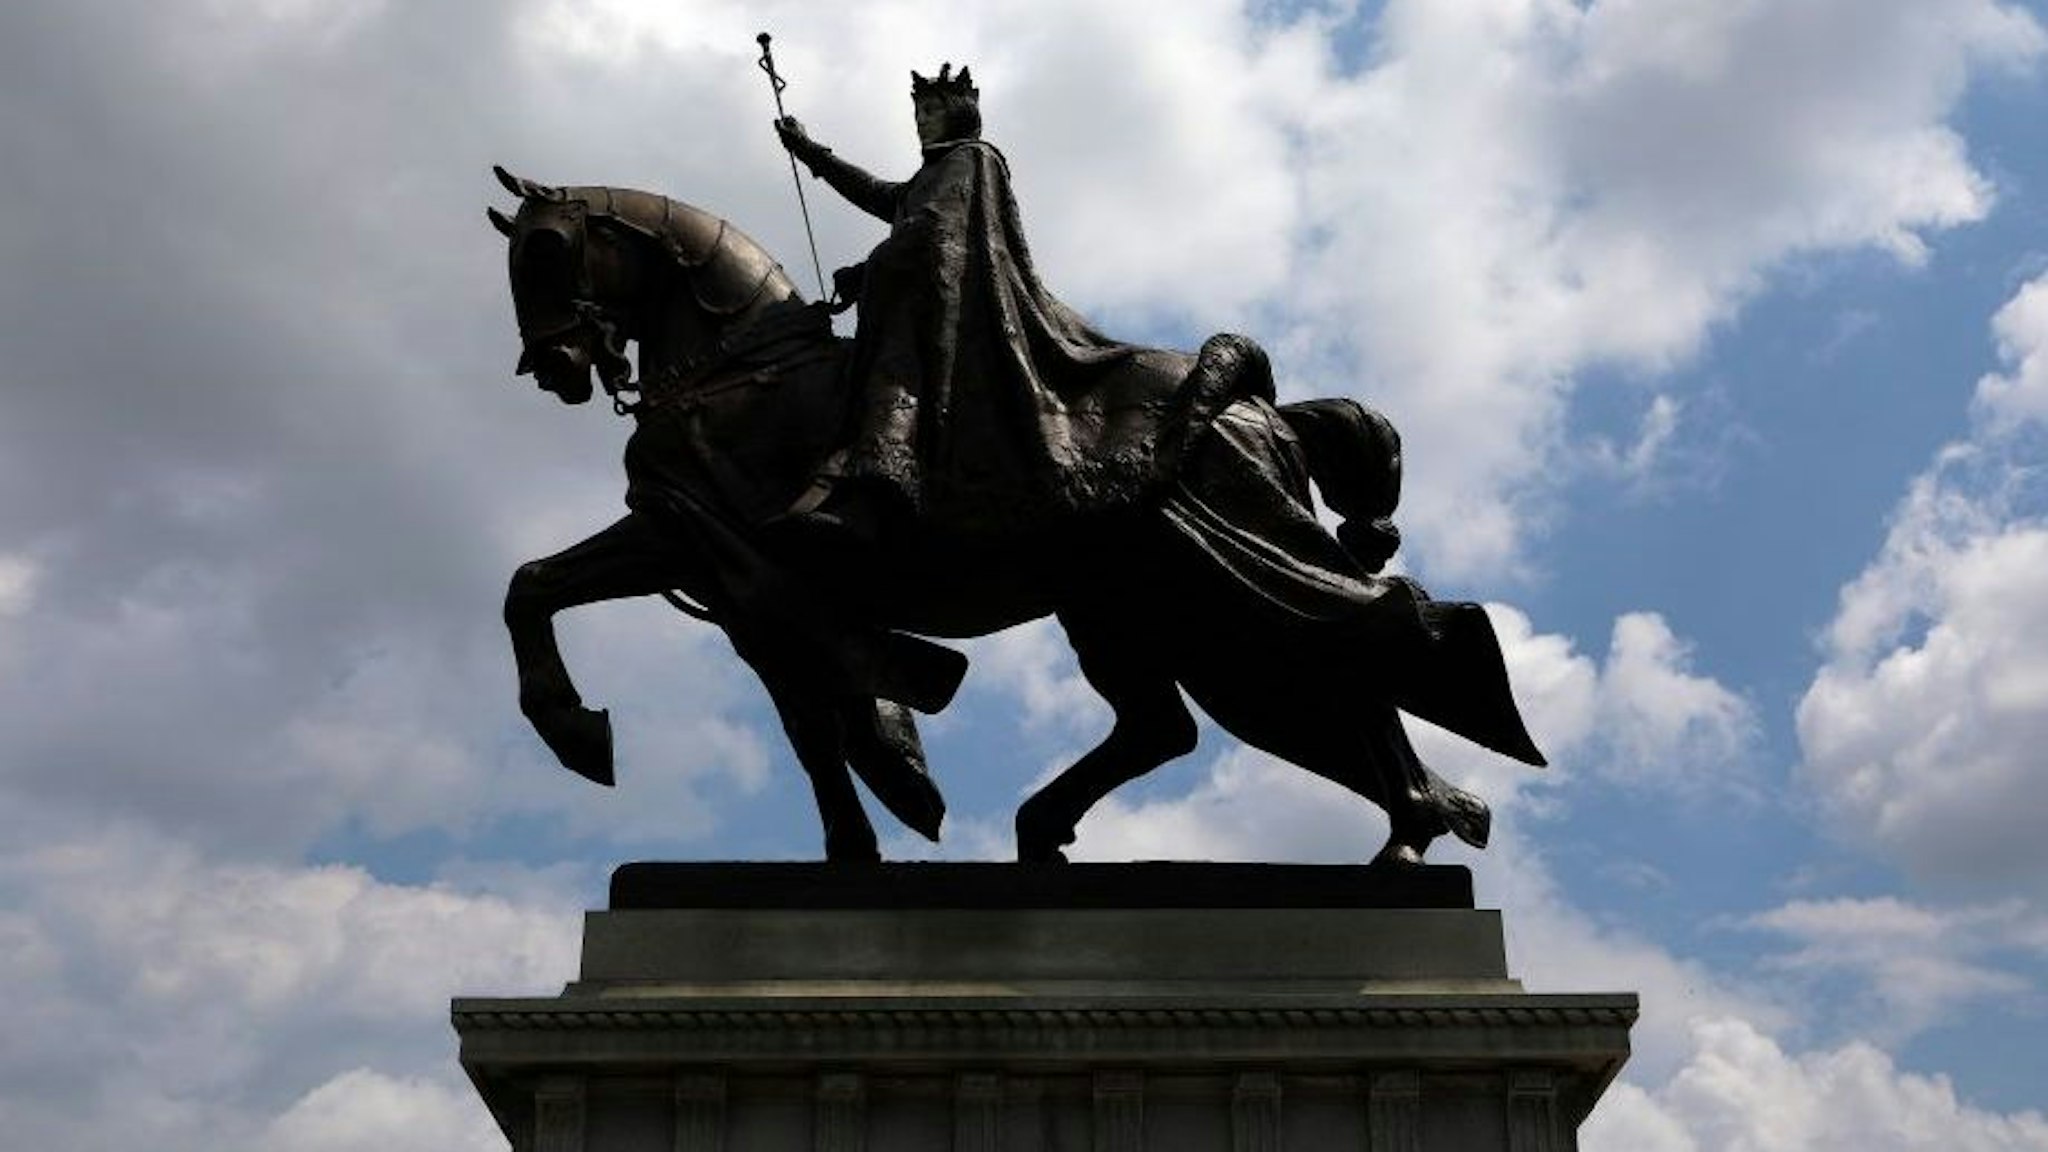 'Apotheosis of St. Louis', a statue of King Louis IX of France, the namesake of St. Louis, Missouri stands outside the St. Louis Art Museum in St. Louis, Missouri on August 10, 2017.